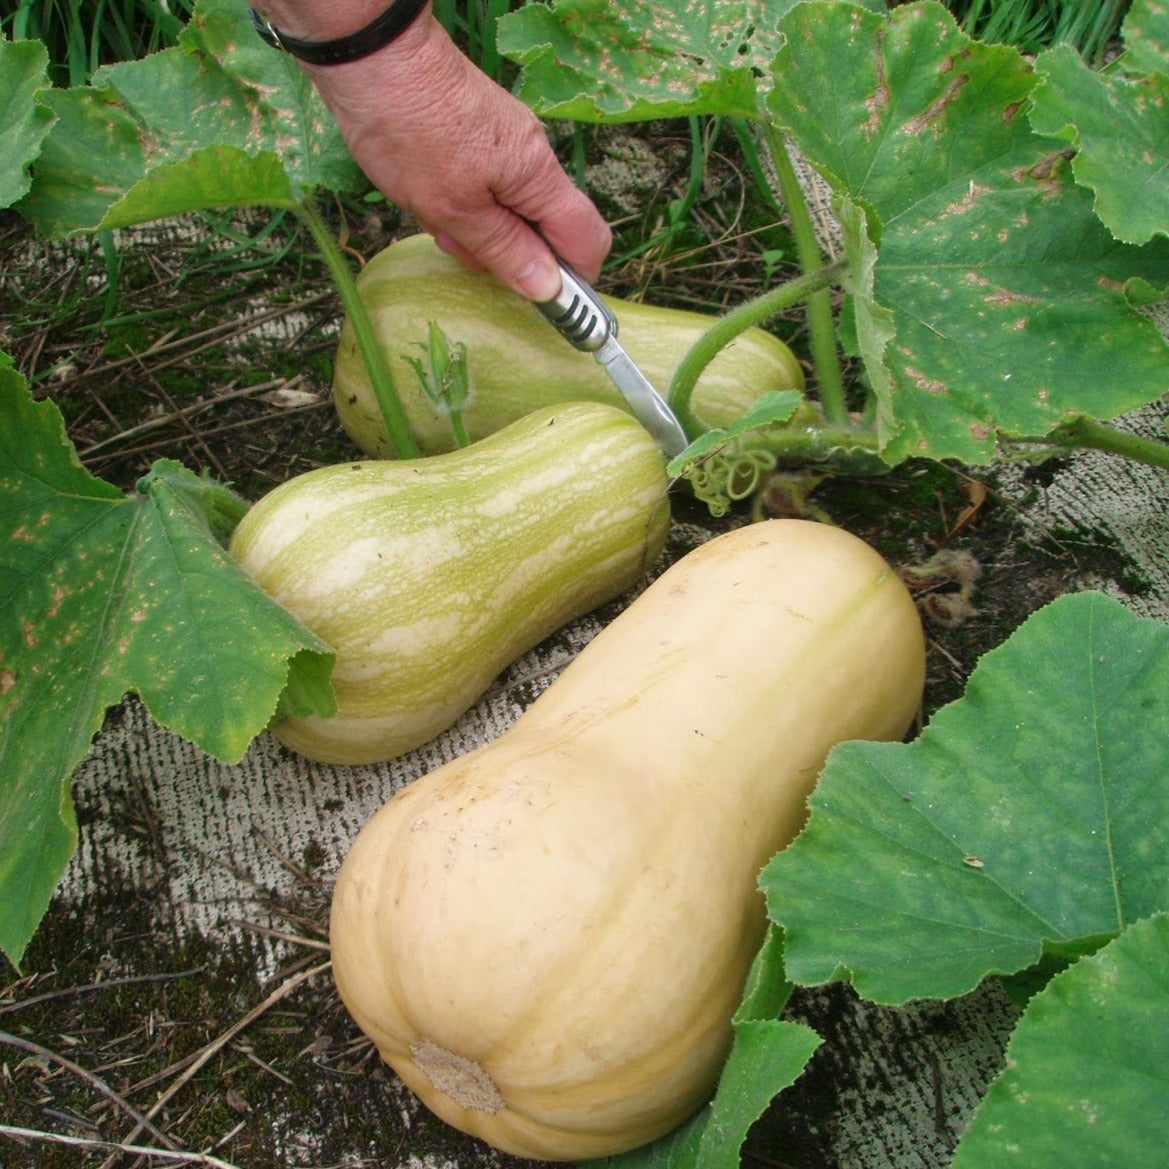 List 90+ Images pictures of butternut squash growing Latest